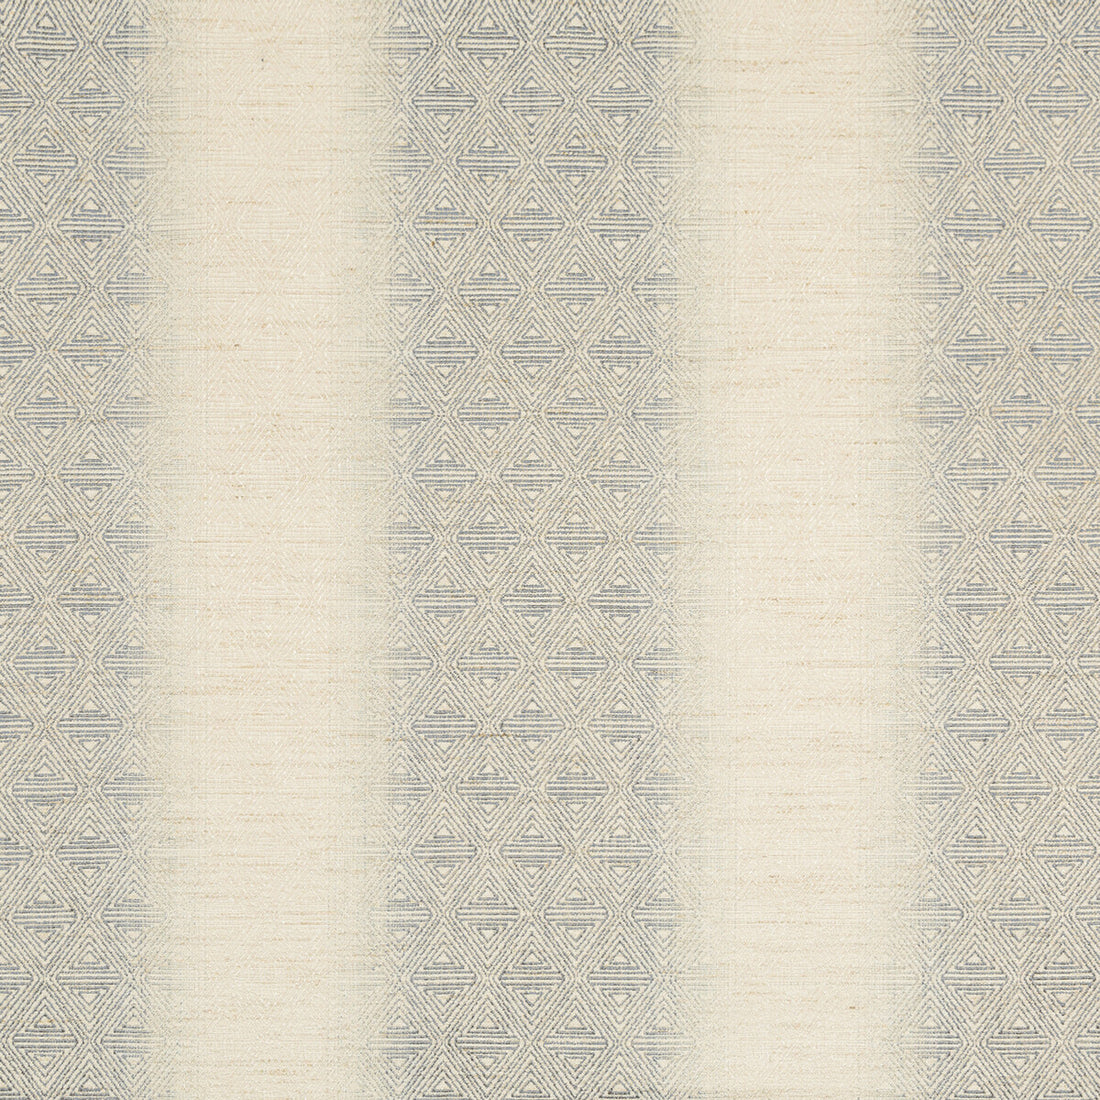 Tulum fabric in glacier color - pattern 35556.15.0 - by Kravet Couture in the Modern Colors-Sojourn Collection collection